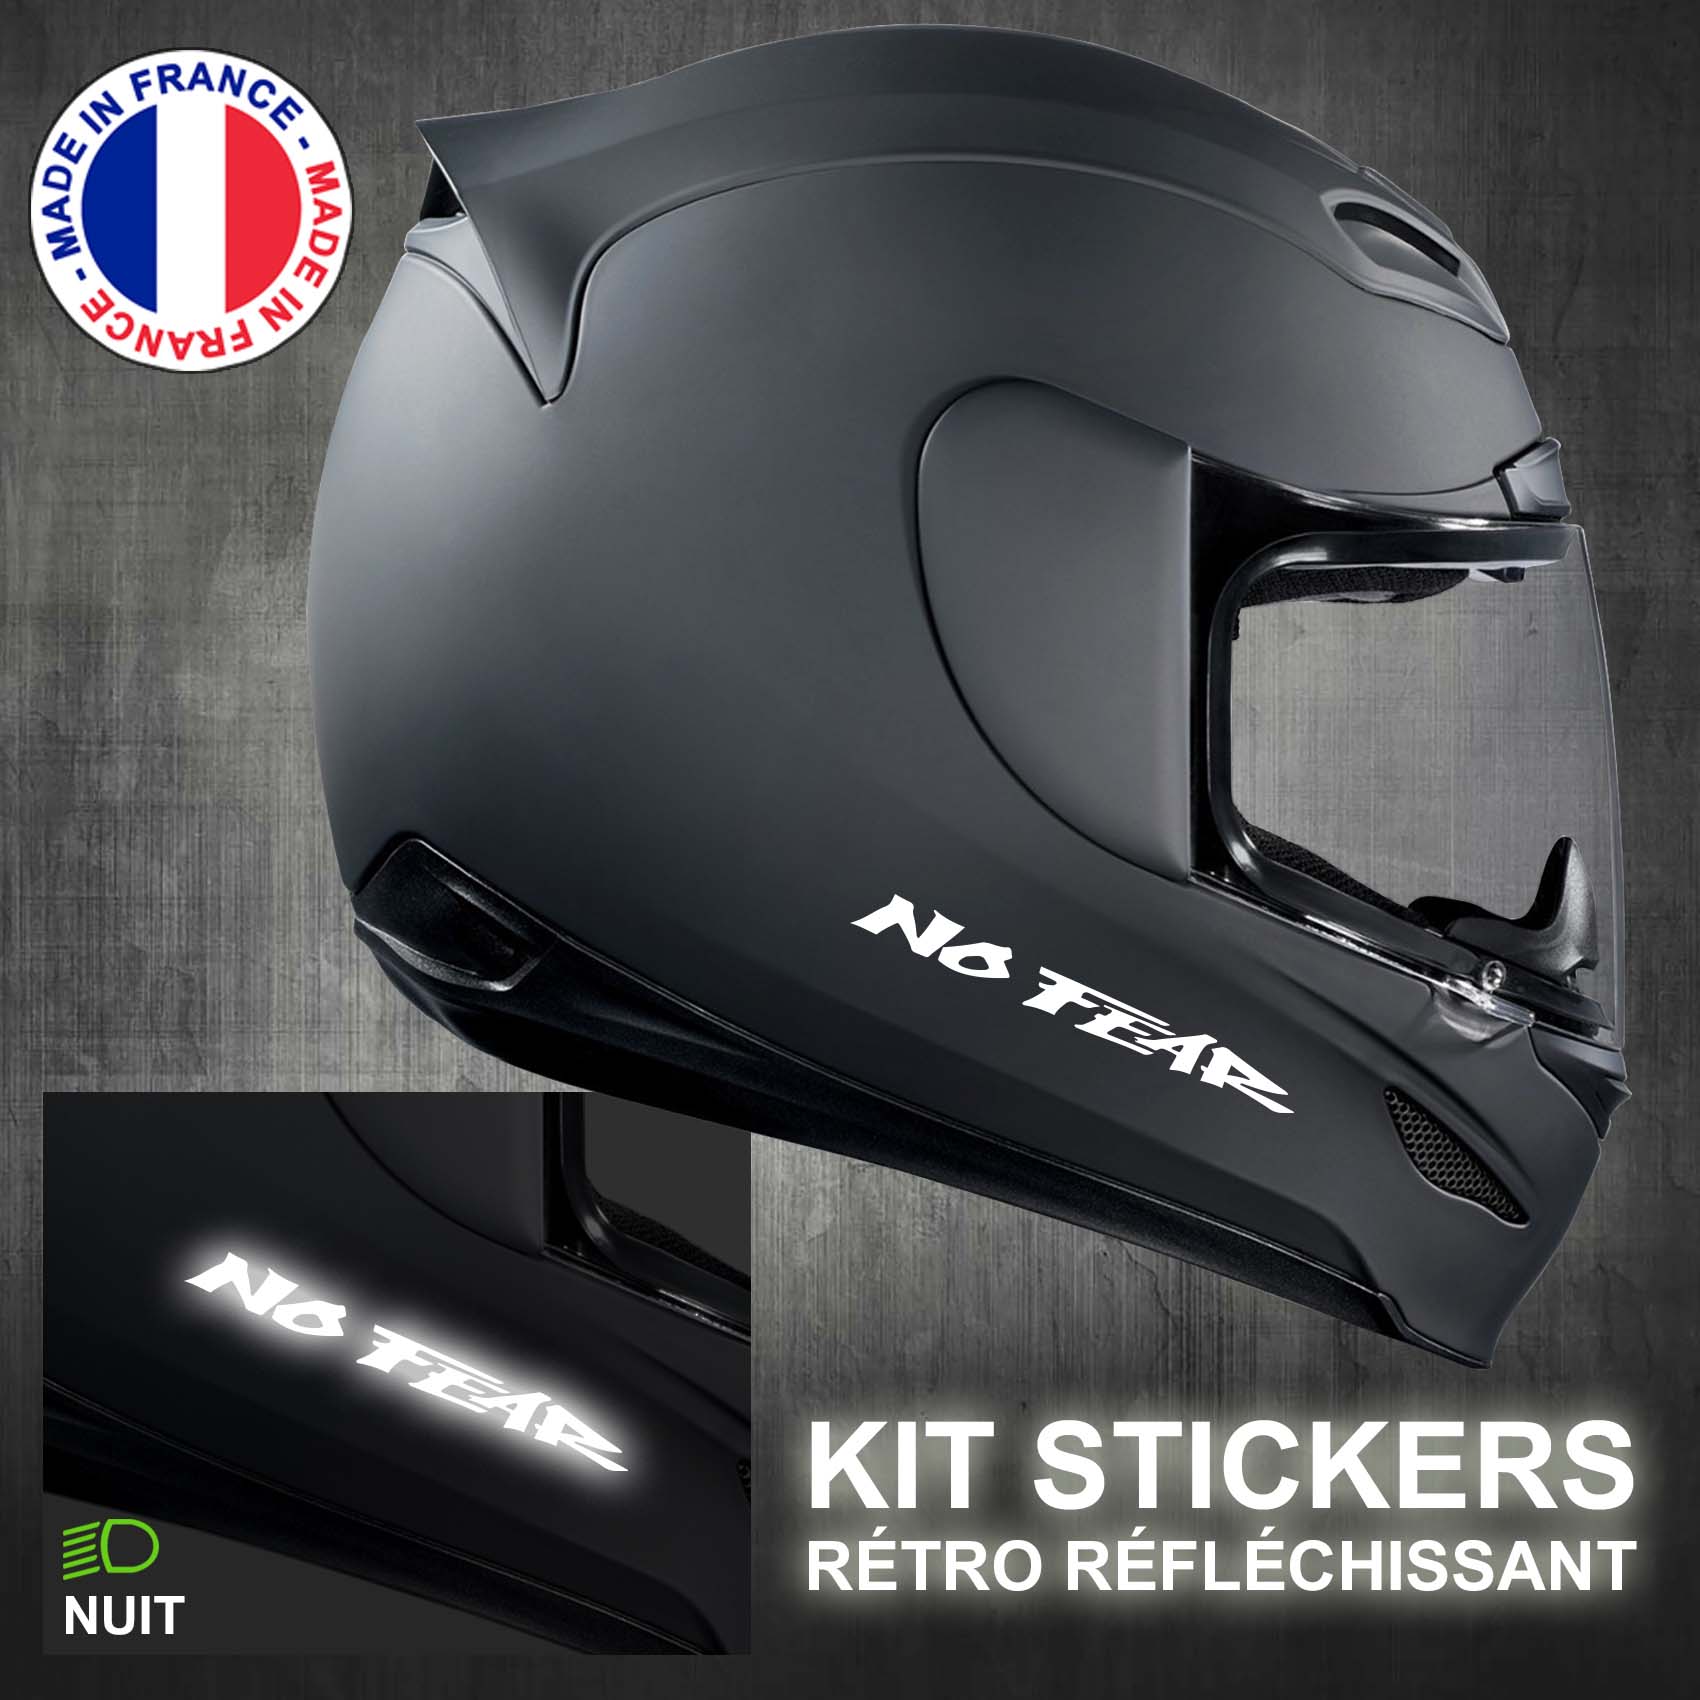 stickers-casque-moto-no-fear-ref3-retro-reflechissant-autocollant-noir-moto-velo-tuning-racing-route-sticker-casques-adhesif-scooter-nuit-securite-decals-personnalise-personnalisable-min